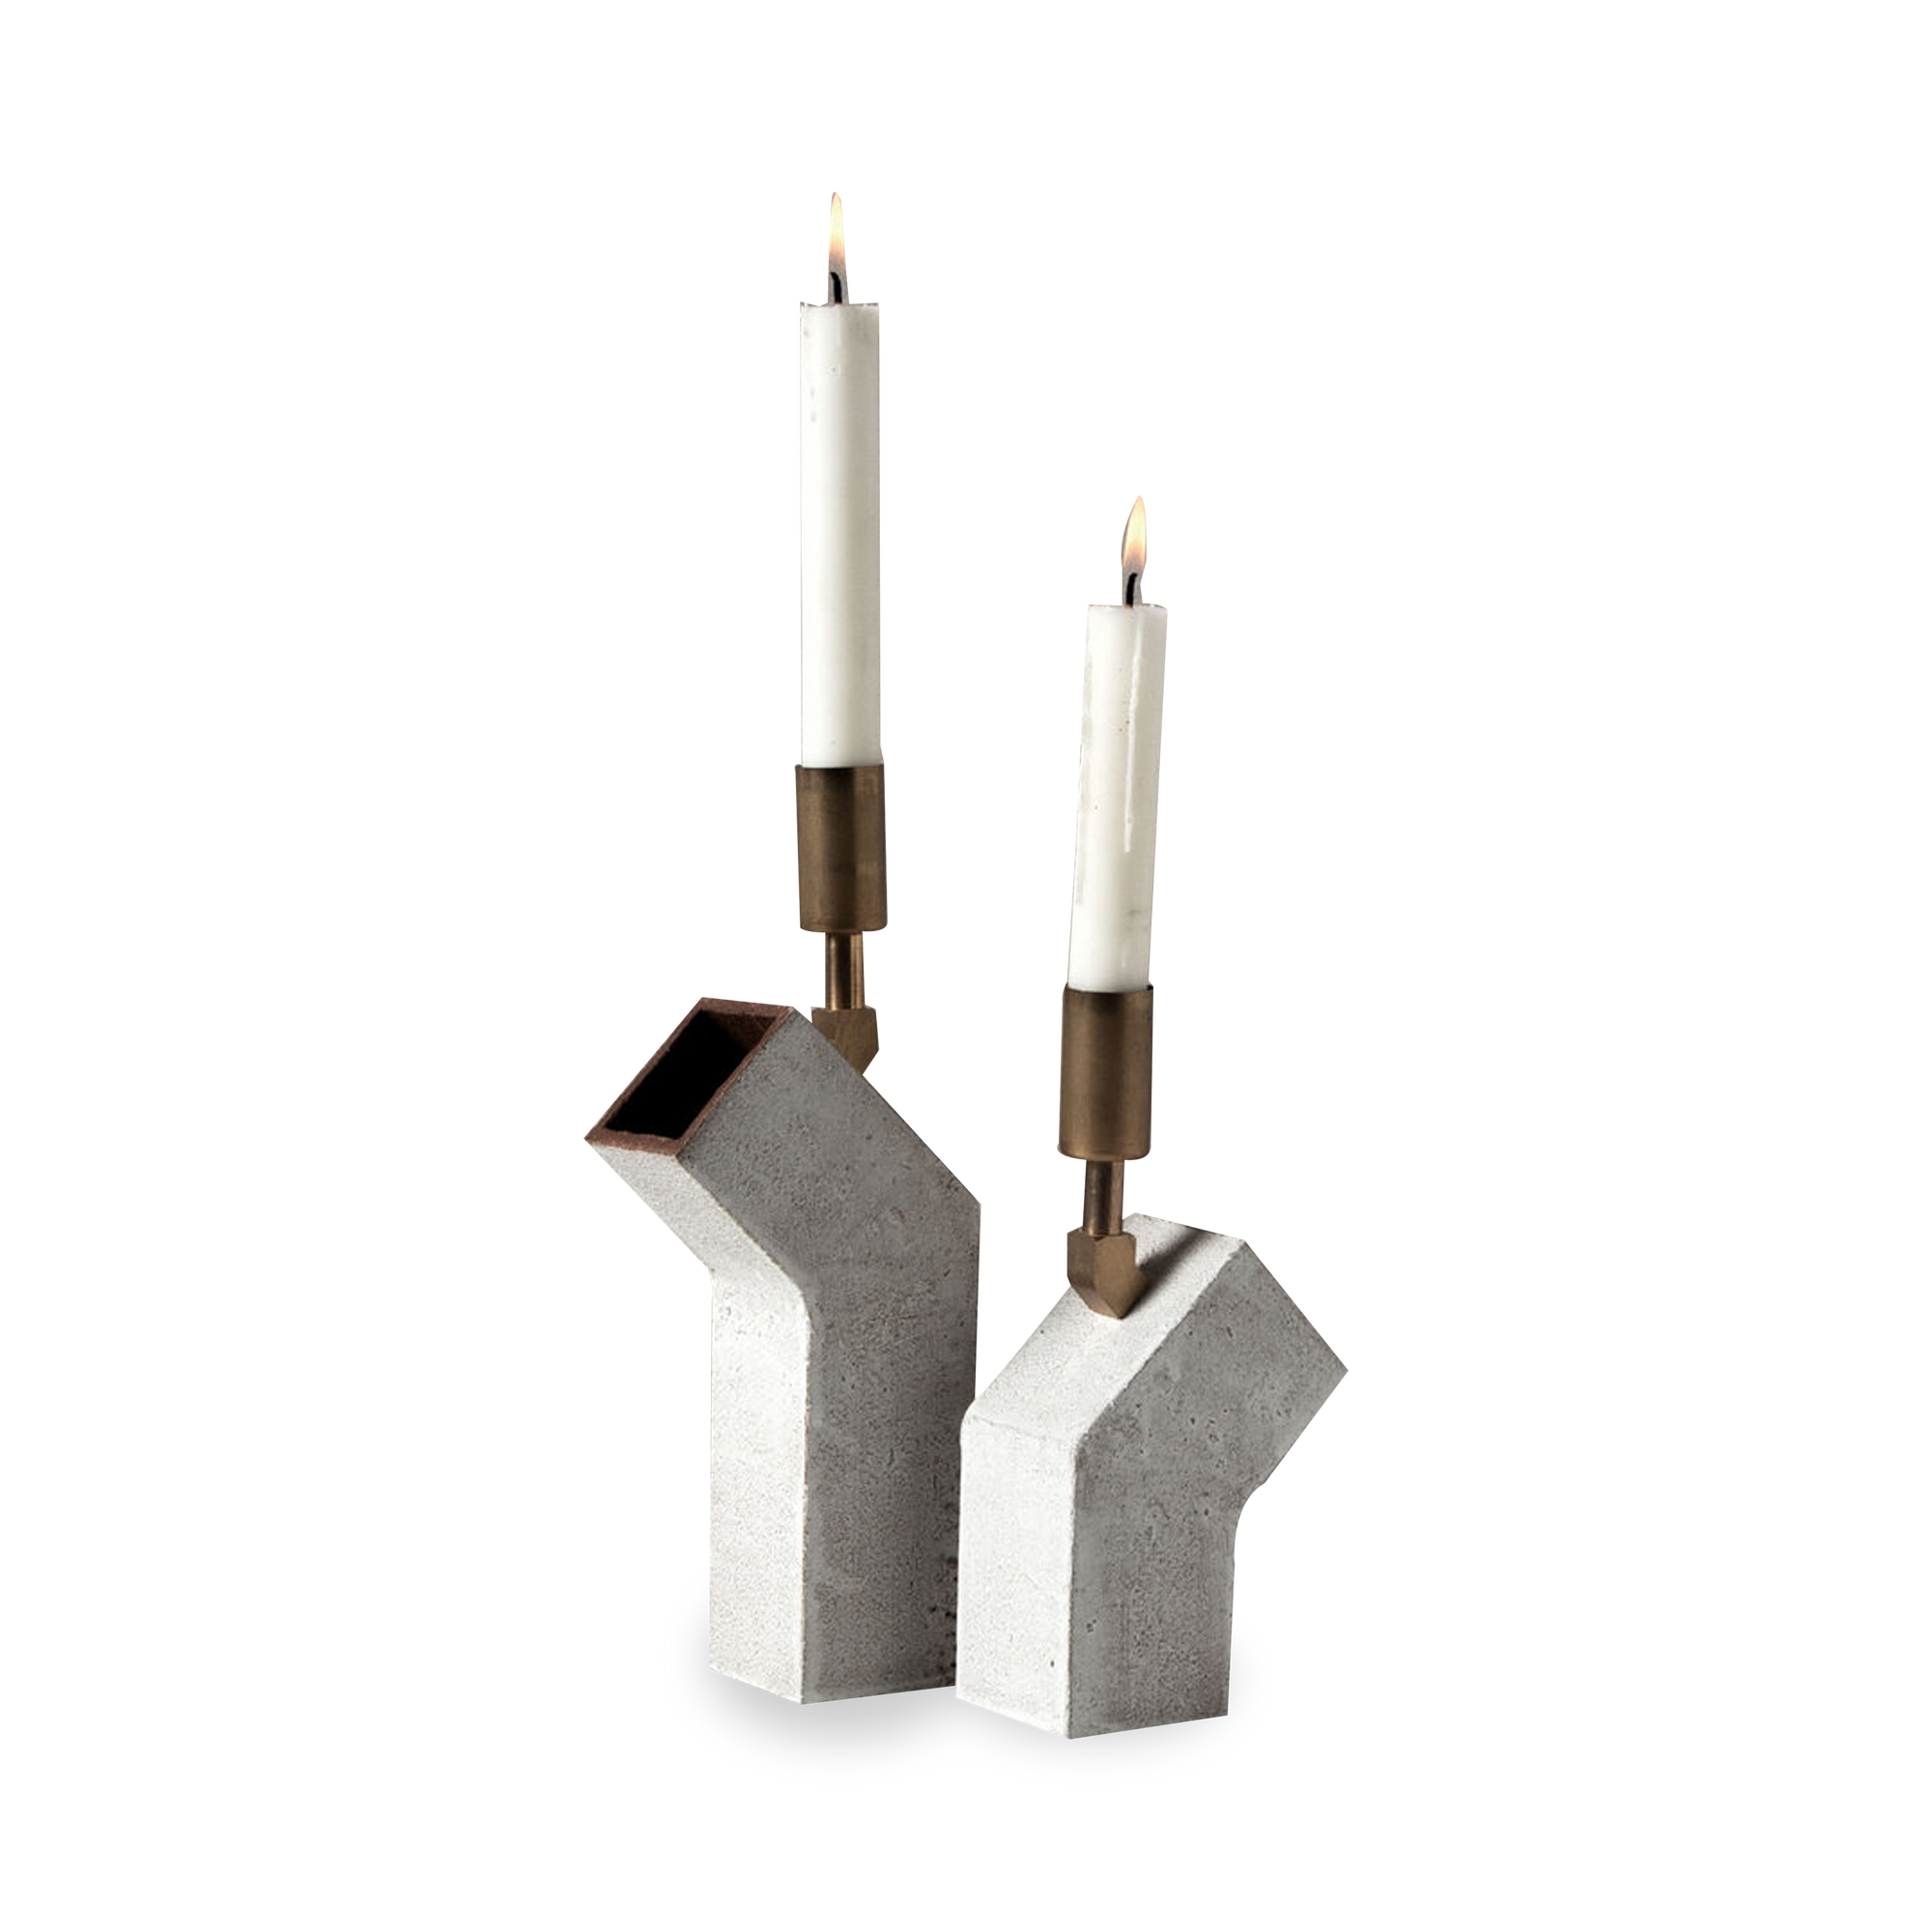 Inspired by midcentury Brutalist architecture and building materials, this pair of candlesticks balances a strong substantial base with delicate hardware.